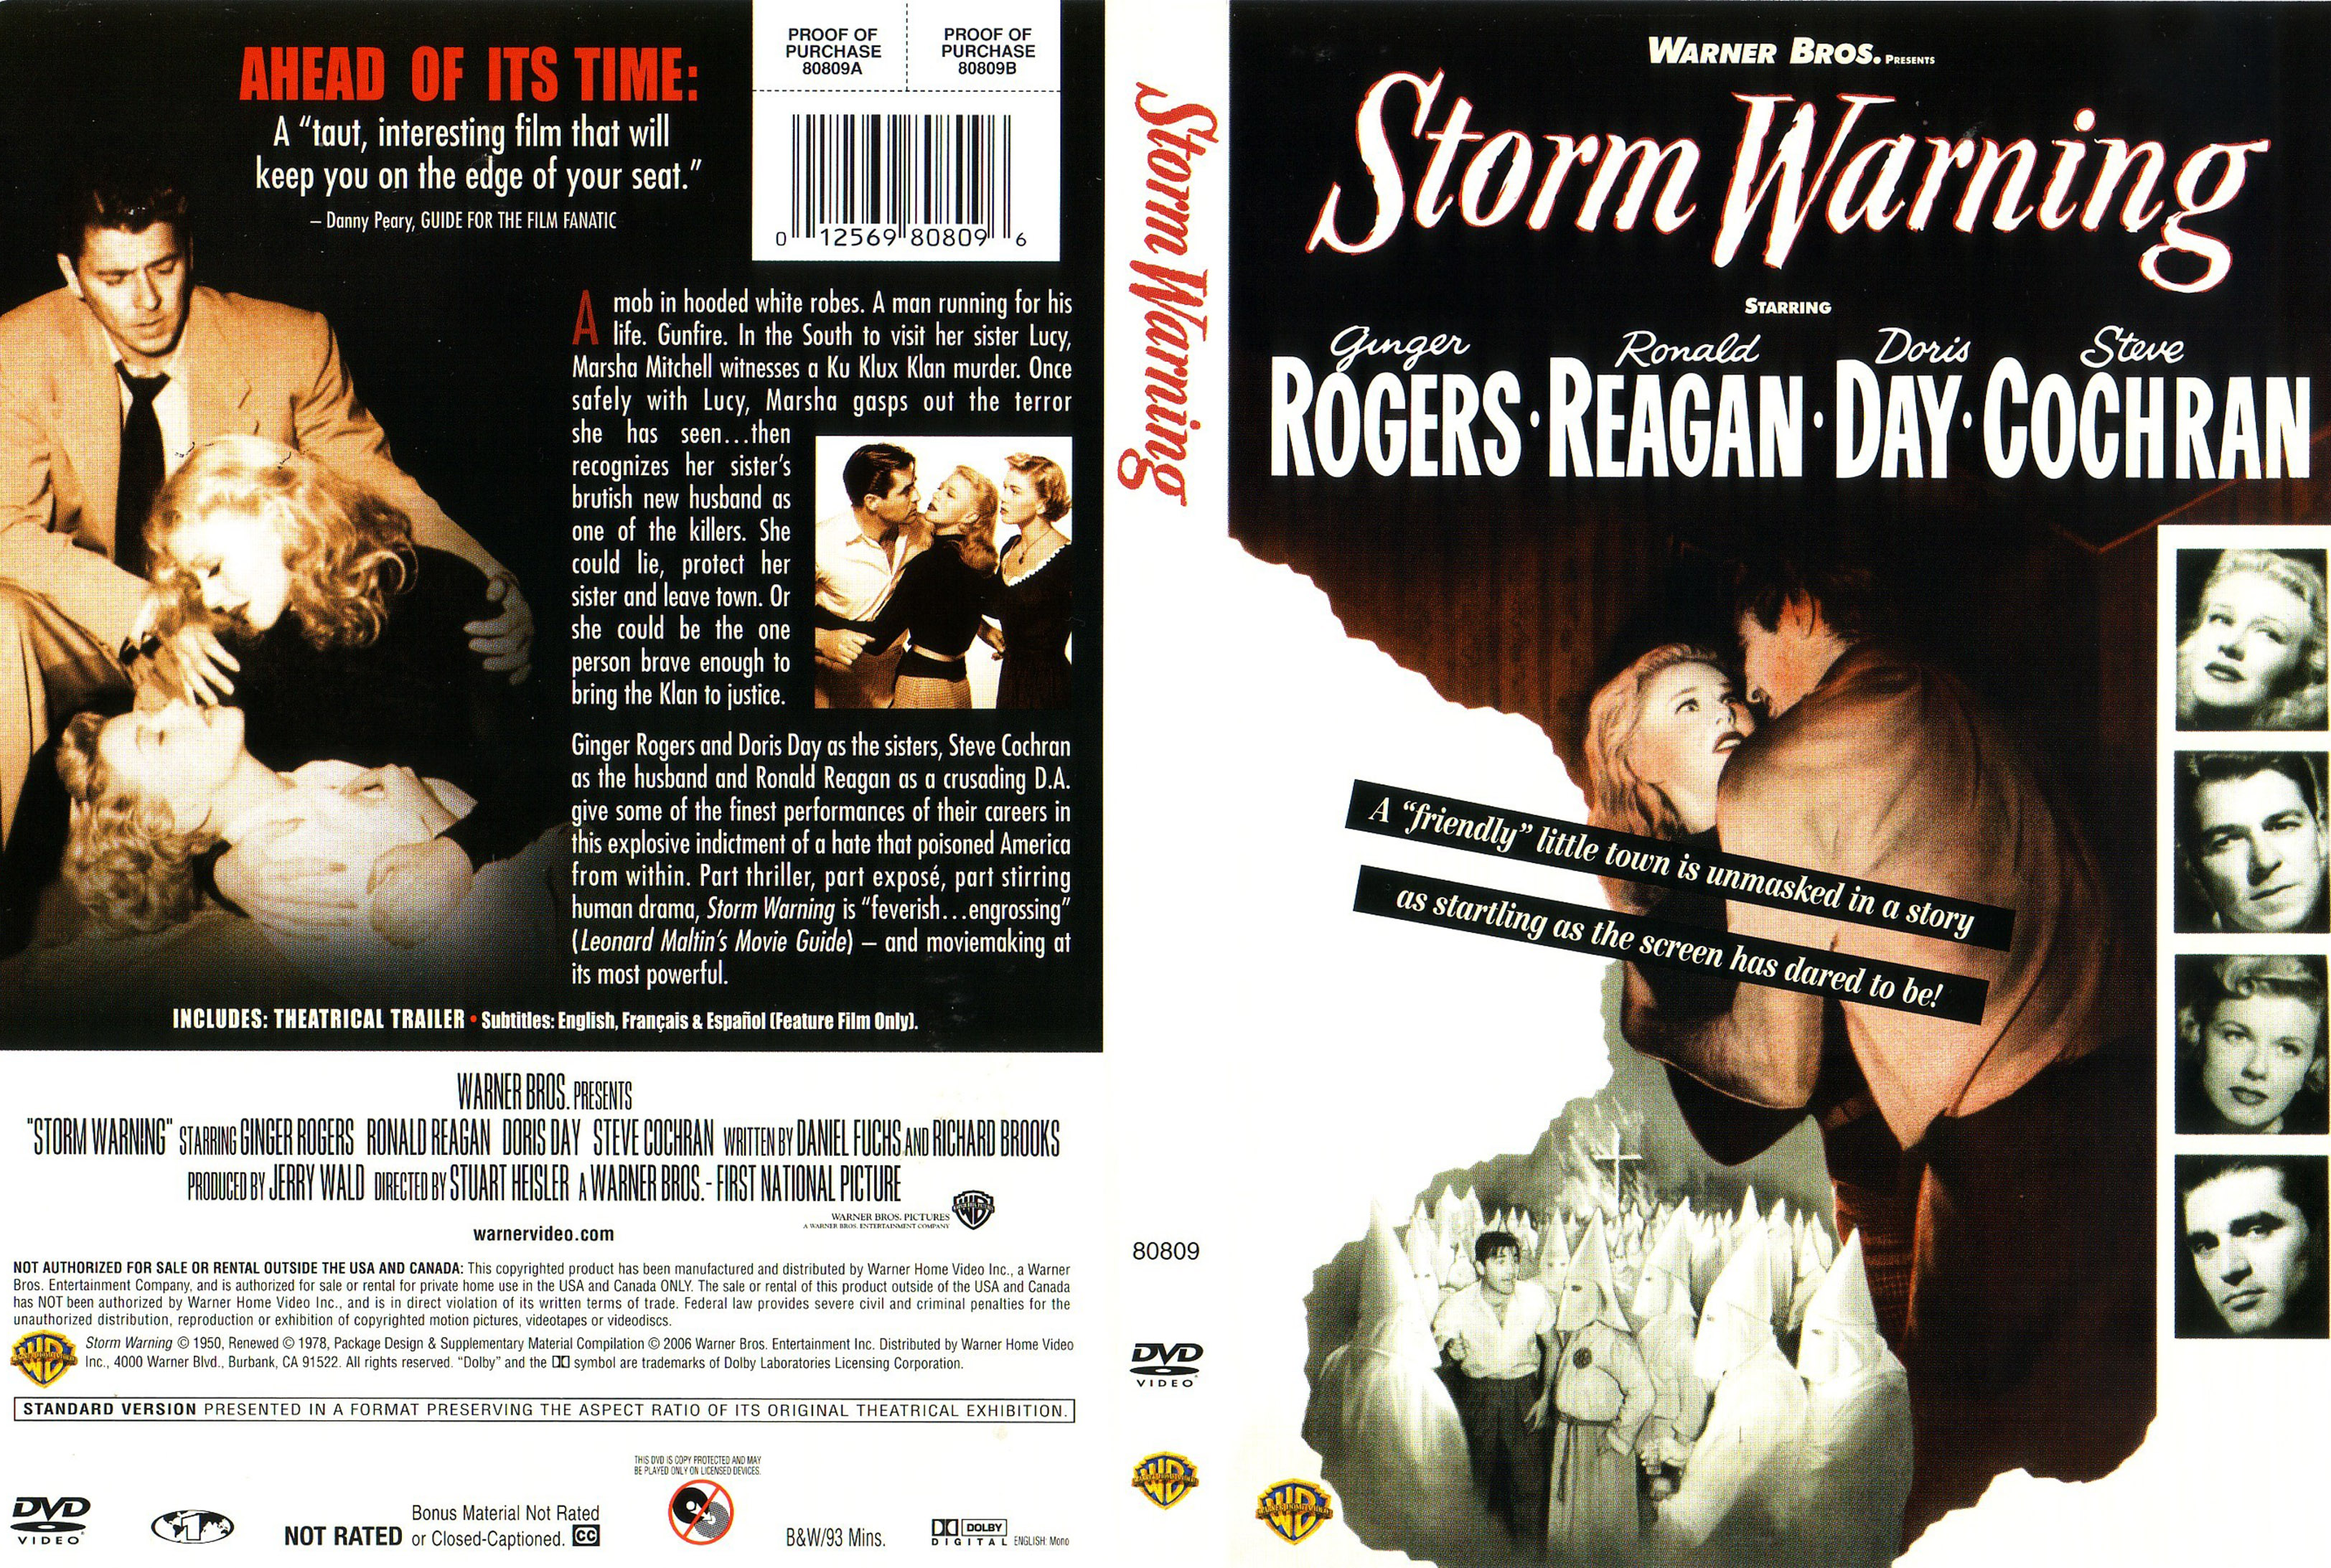 Jaquette DVD Storm warning Zone 1